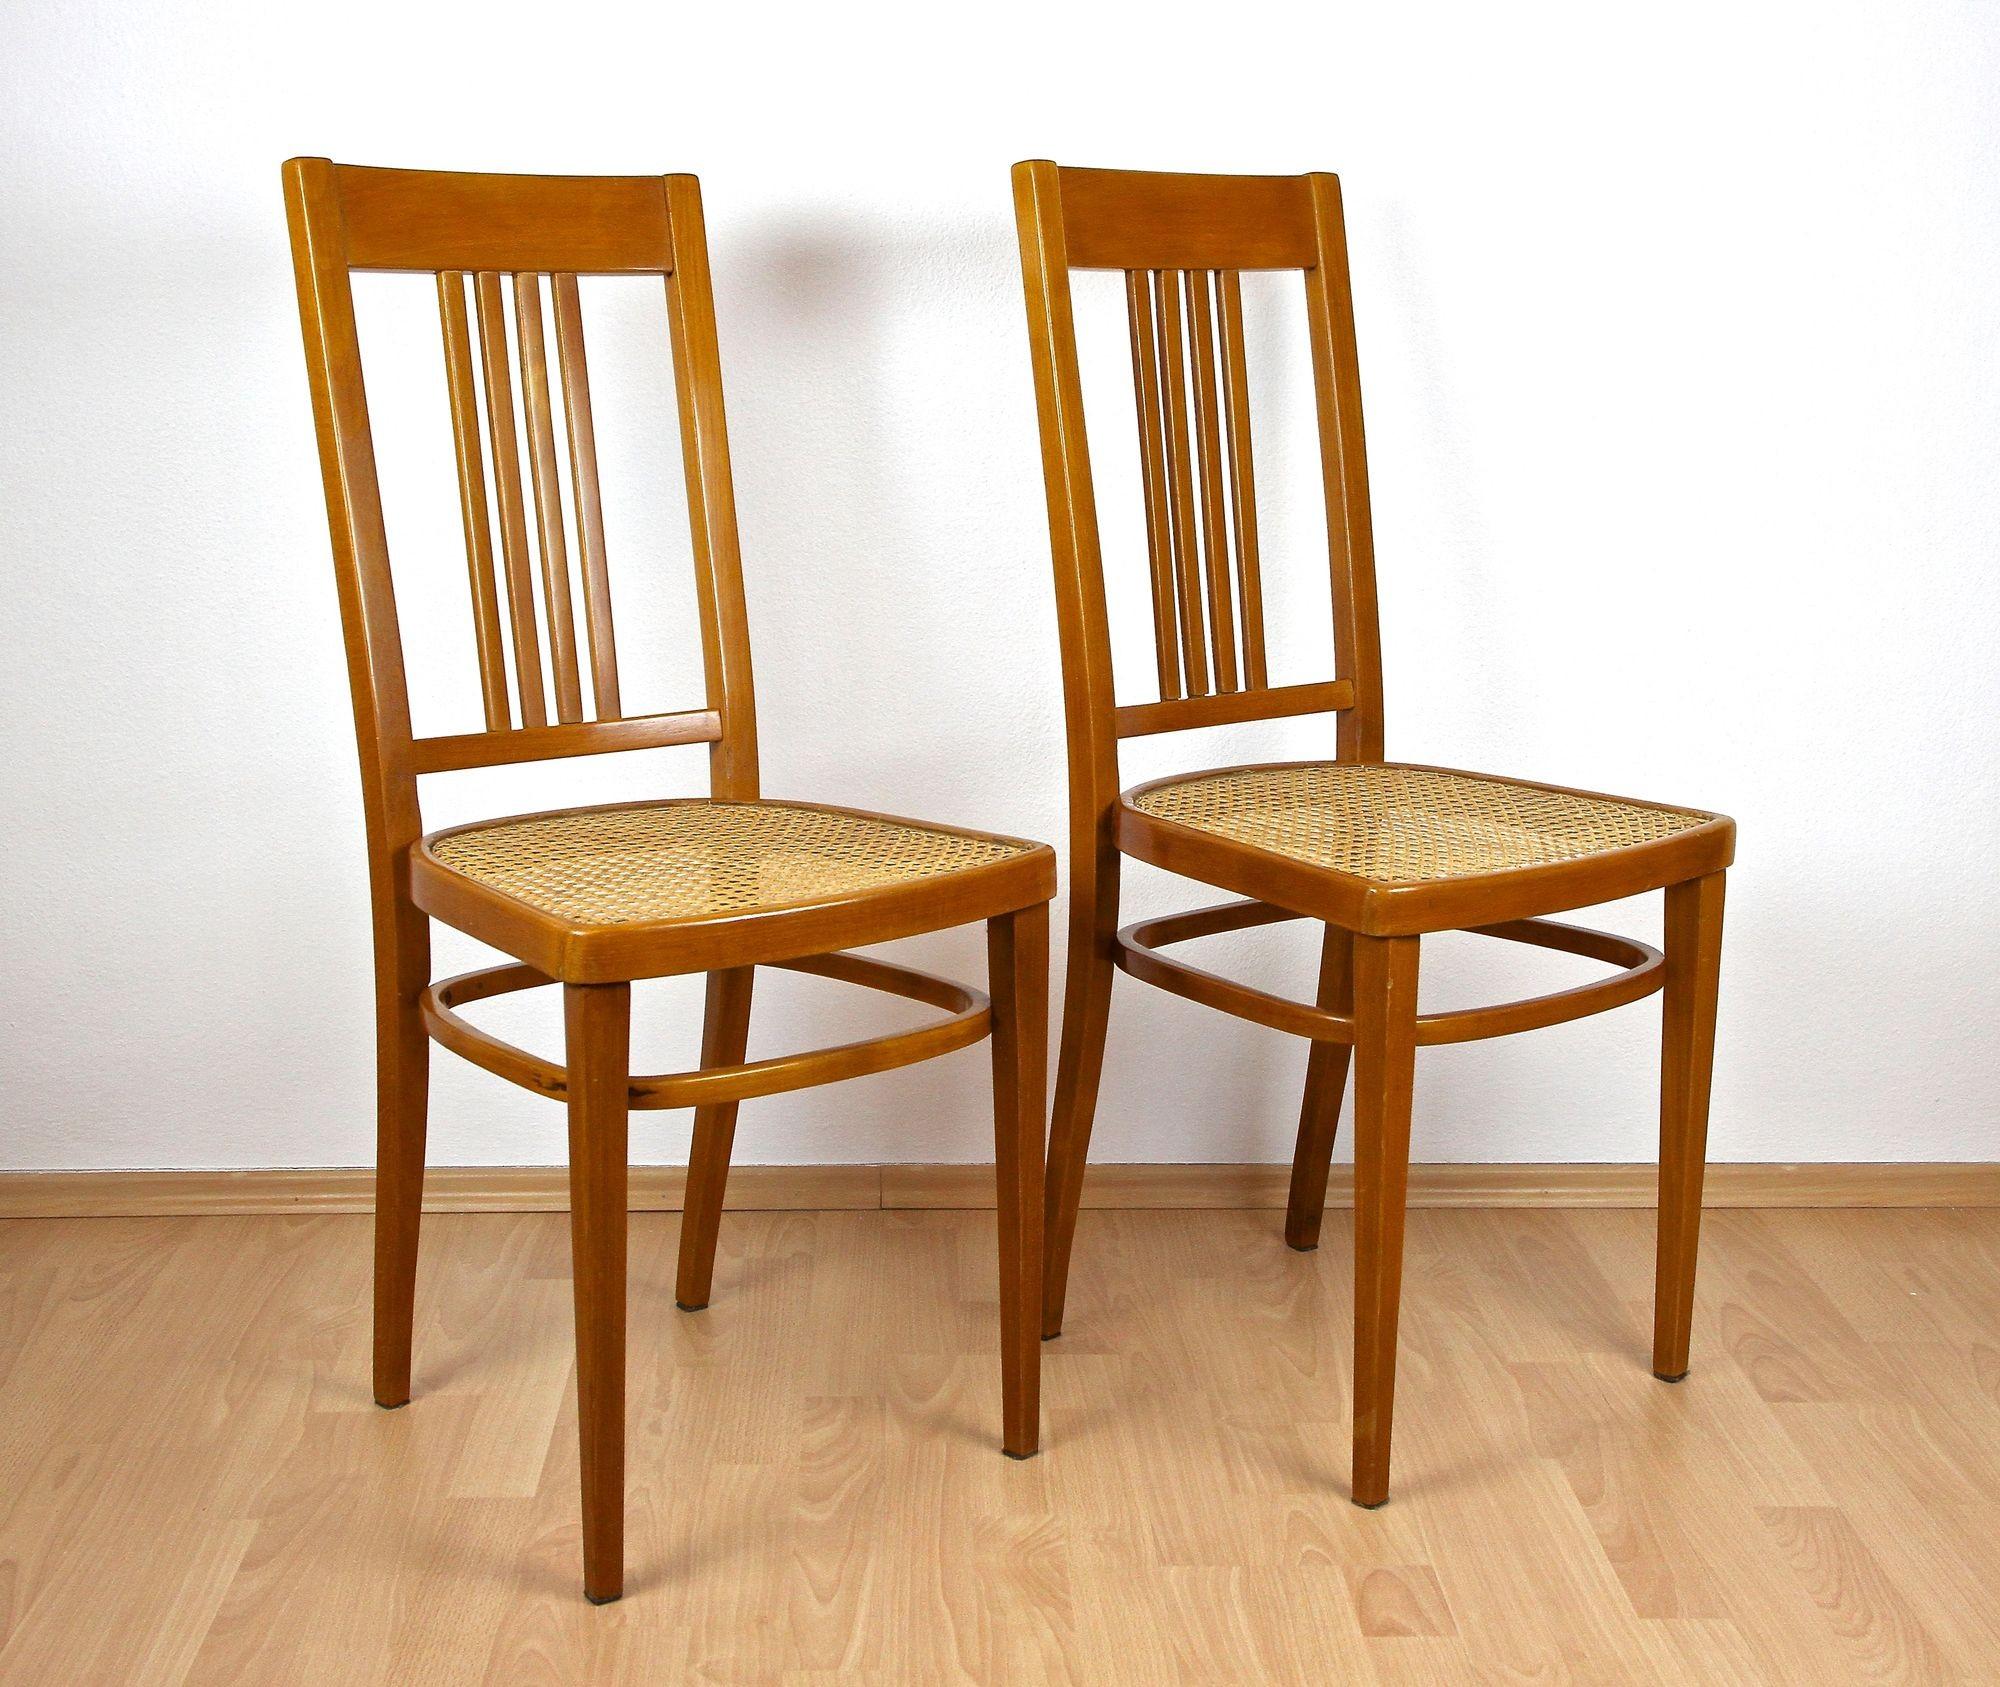 Pair of rare early 20th century bentwood side chairs designed by famous Austrian architect and painter Marcel Kammerer (1878 -1959) for Jacob & Josef Kohn. The renowed company of J&J Kohn was beside Thonet the world market leader when it came to